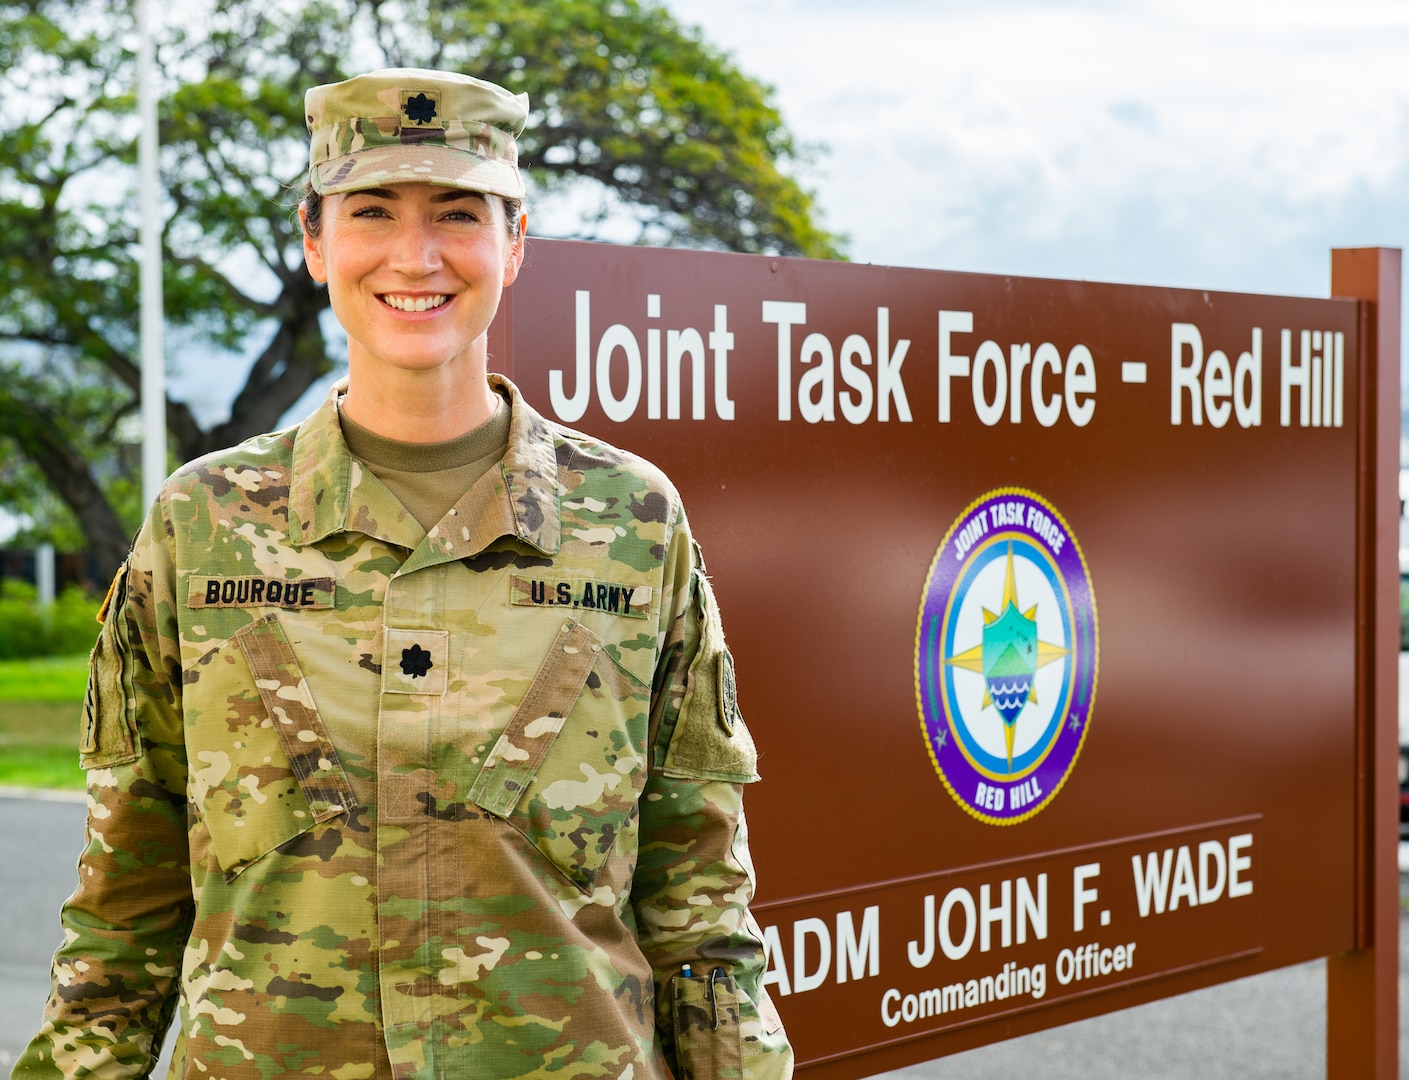 U.S. Army Lt. Col. Jill Bourque, Deputy Chief of Staff of Joint Task Force-Red Hill (JTF-RH), poses in front of the JTF-RH Headquarters on Ford Island, Hawaii March 21, 2023. JTF-RH is in phase three of its five-phase defueling plan. Personnel are focused on completing repairs, quality control tasks, training, response preparation, the National Environmental Policy Act (NEPA) Environmental Assessment (EA), regulatory approvals and operational planning for such things as dewatering, repacking, and defueling. This extensive preparatory work will help ensure the safe and expeditious defueling of the RHBFSF. (U.S. Navy photo by Mass Communication Specialist 2nd Class Allayah Klein)